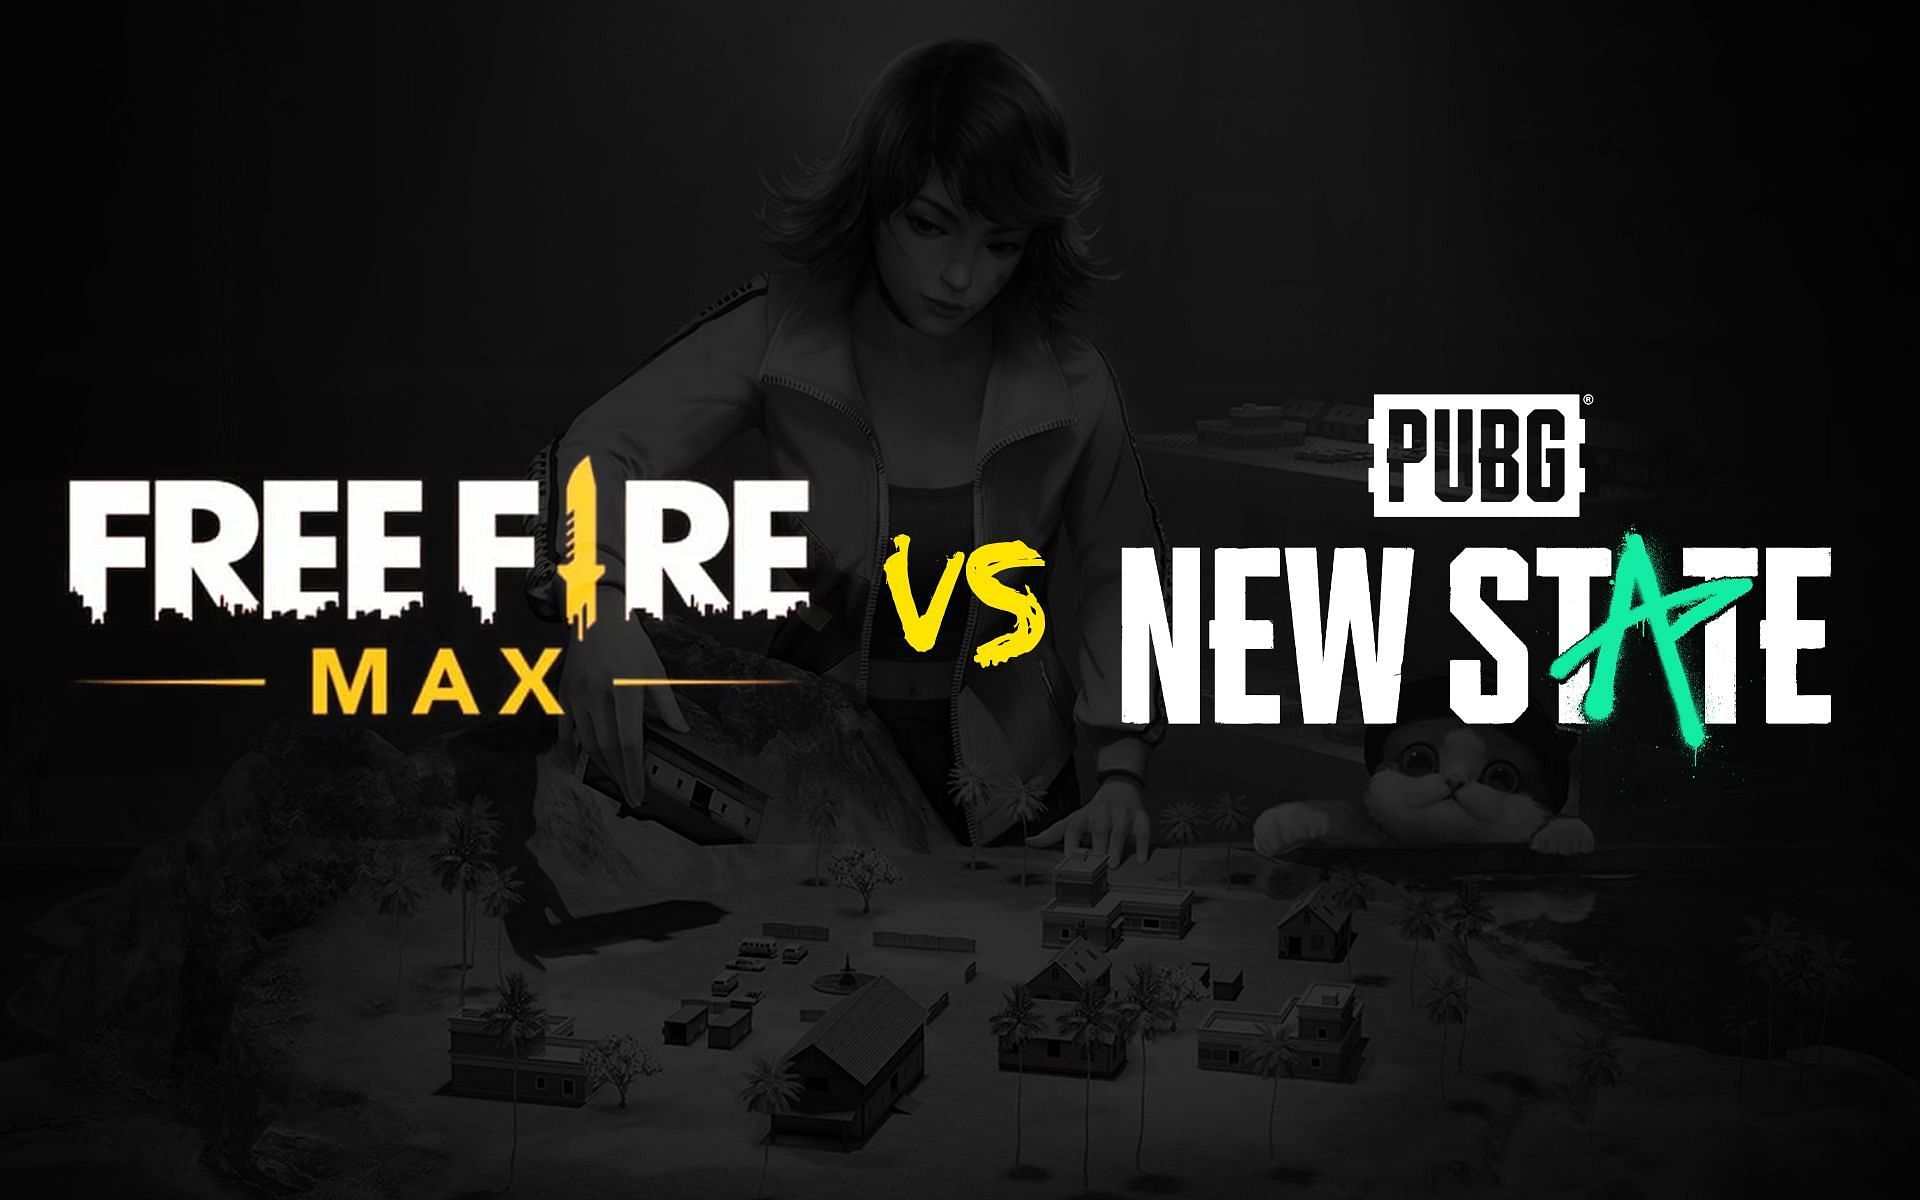 Free Fire MAX vs. PUBG New State: Both games compared based on download size (Image via Sportskeeda)